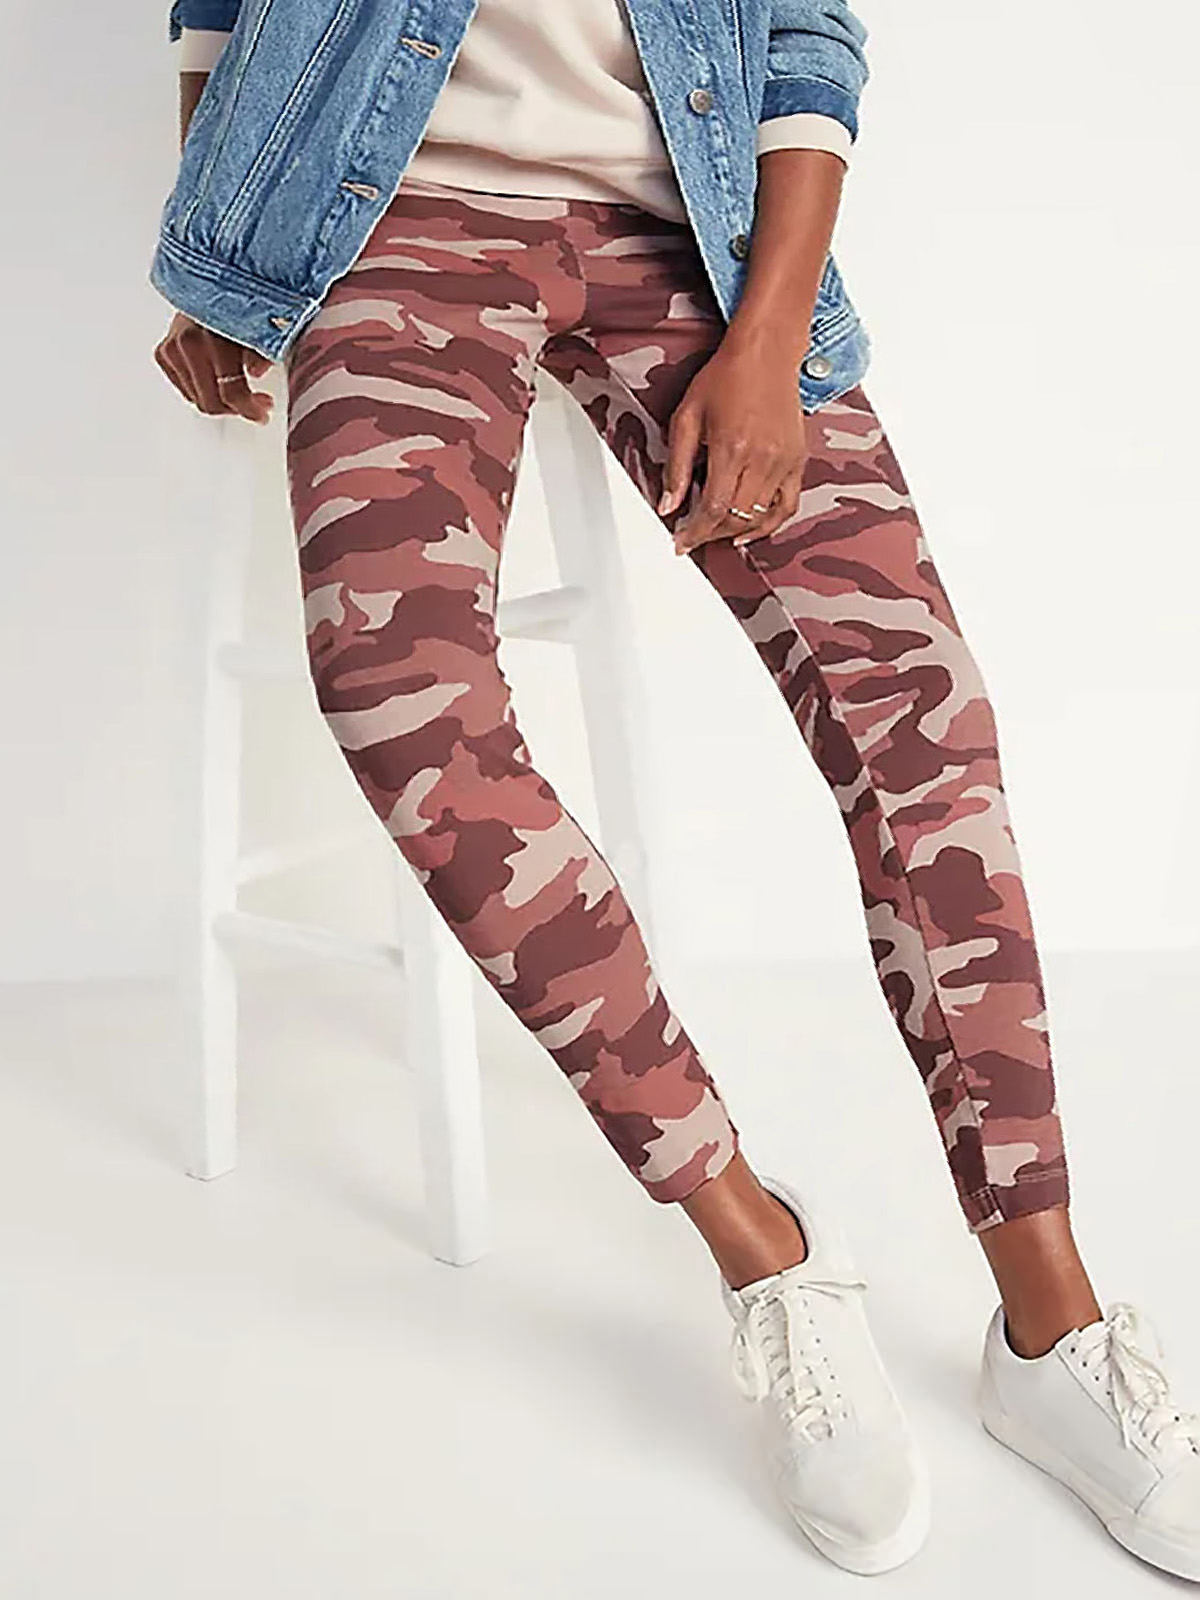 Girls Best Pink Camo Leggings & Pants | Buy 2 Get 1 Free – MomMe and More